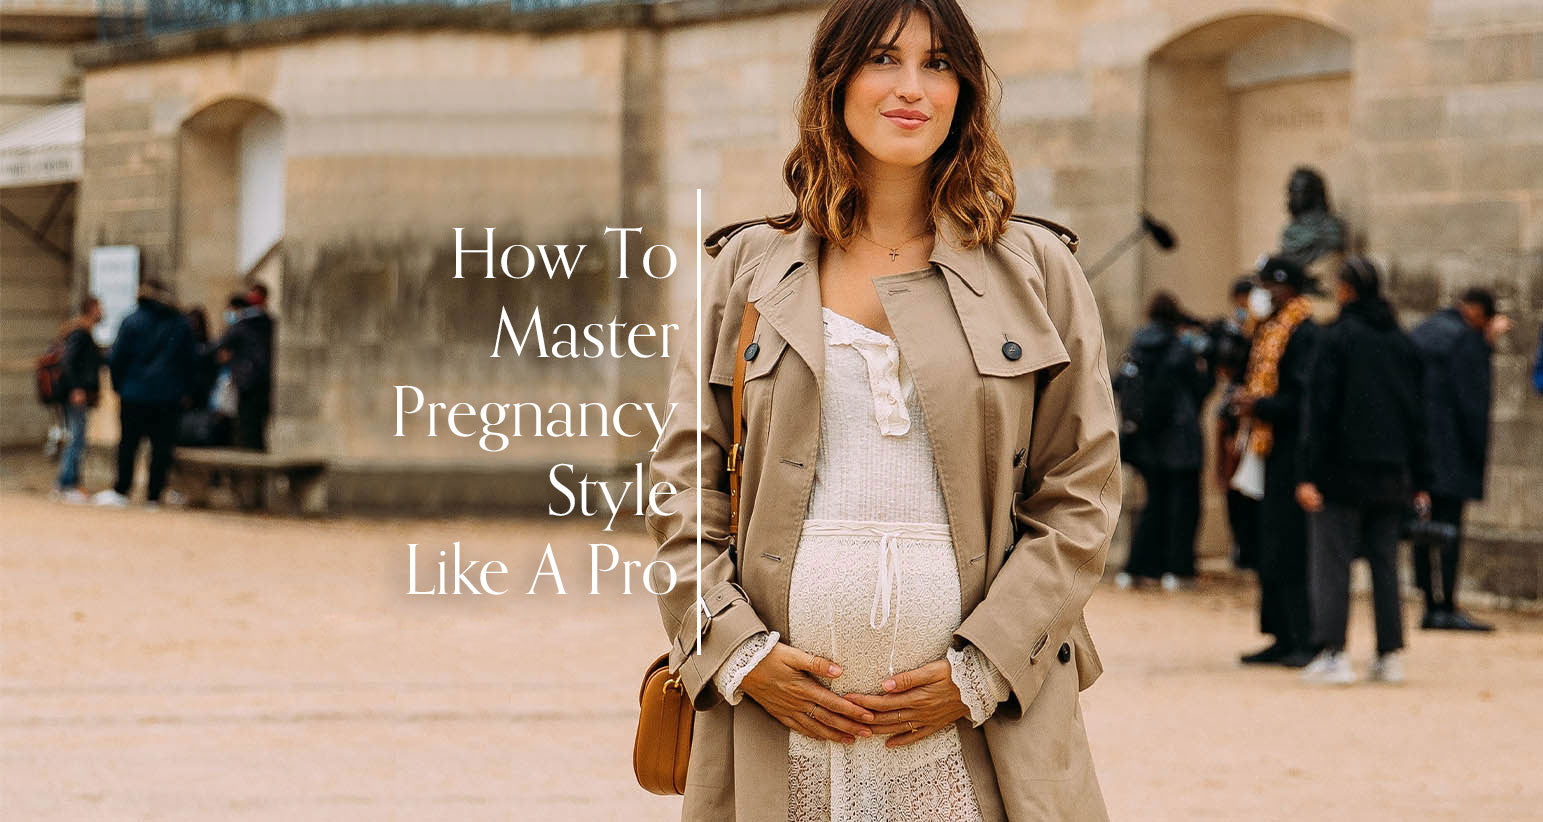 How To Master Pregnancy Style Like A Pro